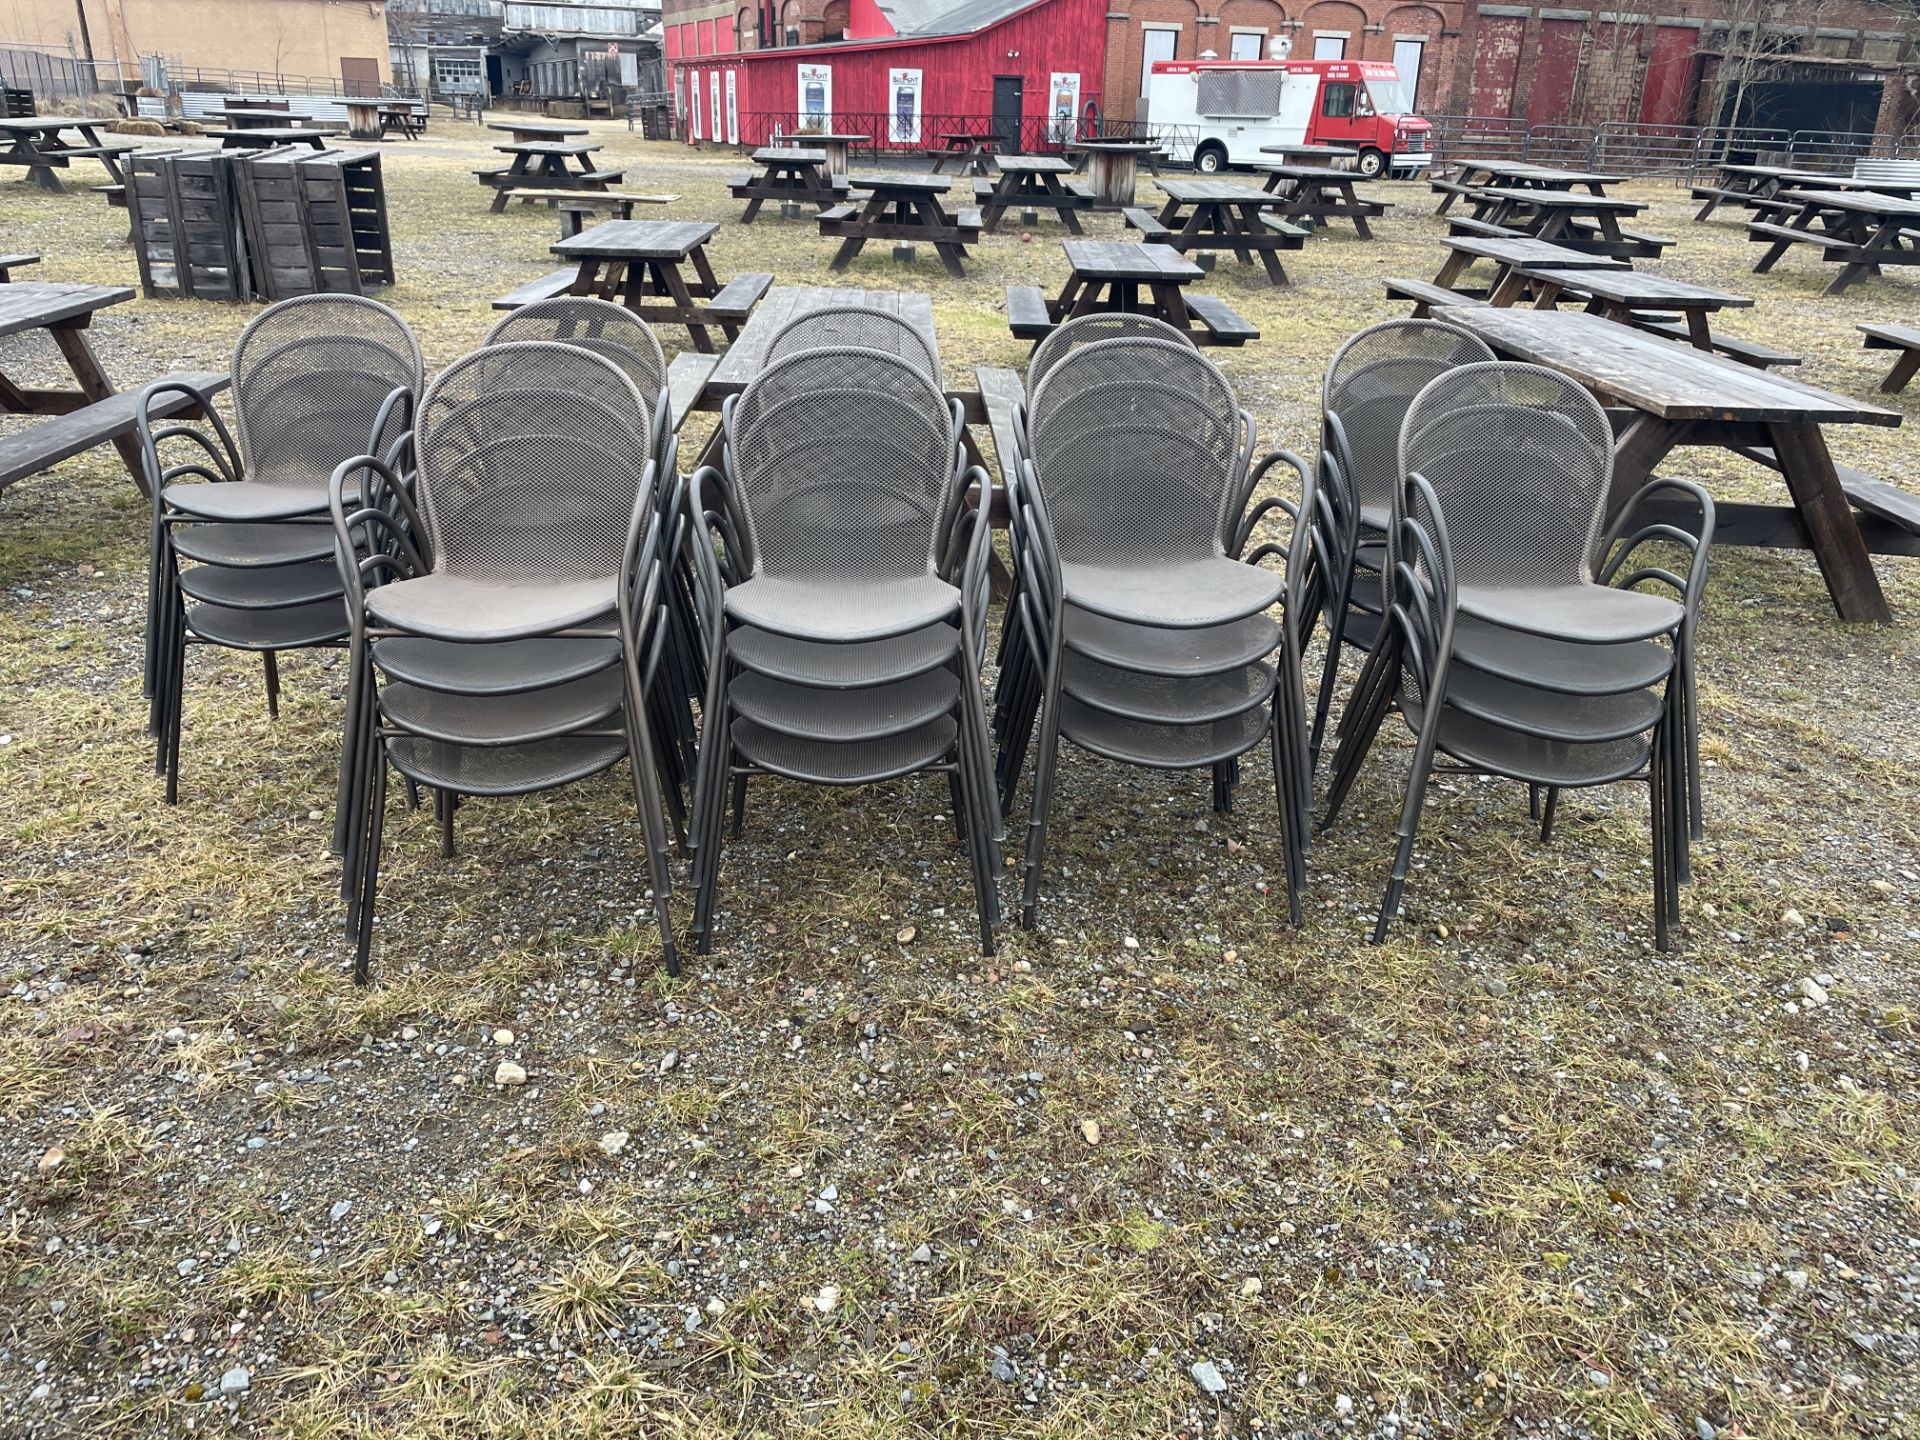 {LOT} (40) Metal Frame Mesh Seat & Back Outdoor Dining Chairs w/(11) Matching Metal Mesh Top Tables( - Image 2 of 3